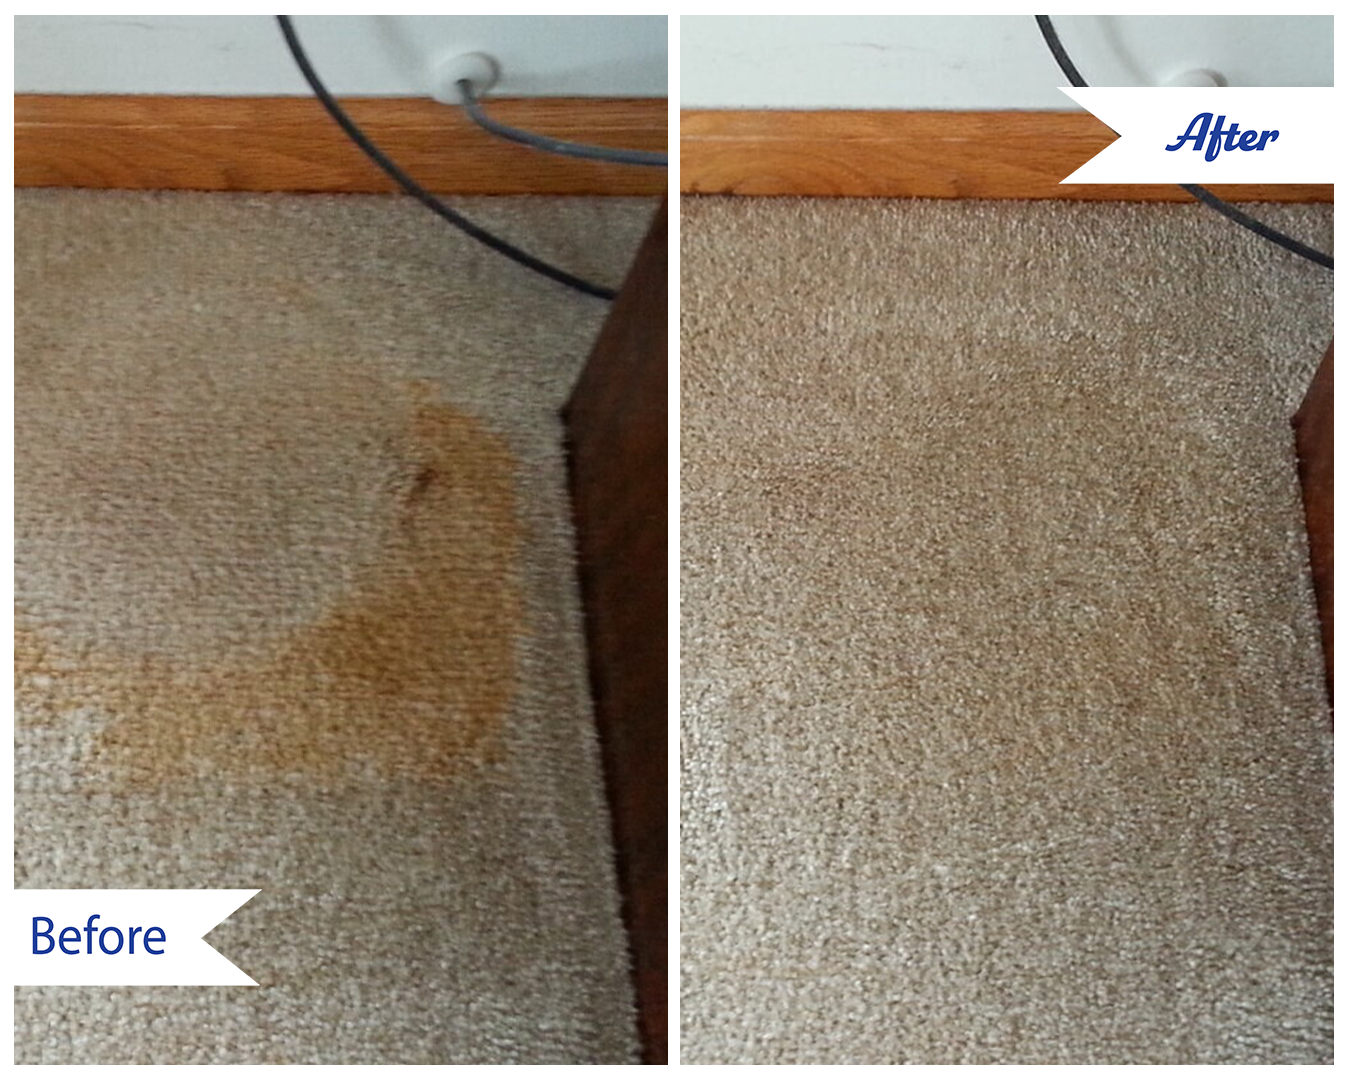 Carpet stain removal in Upland/Rancho